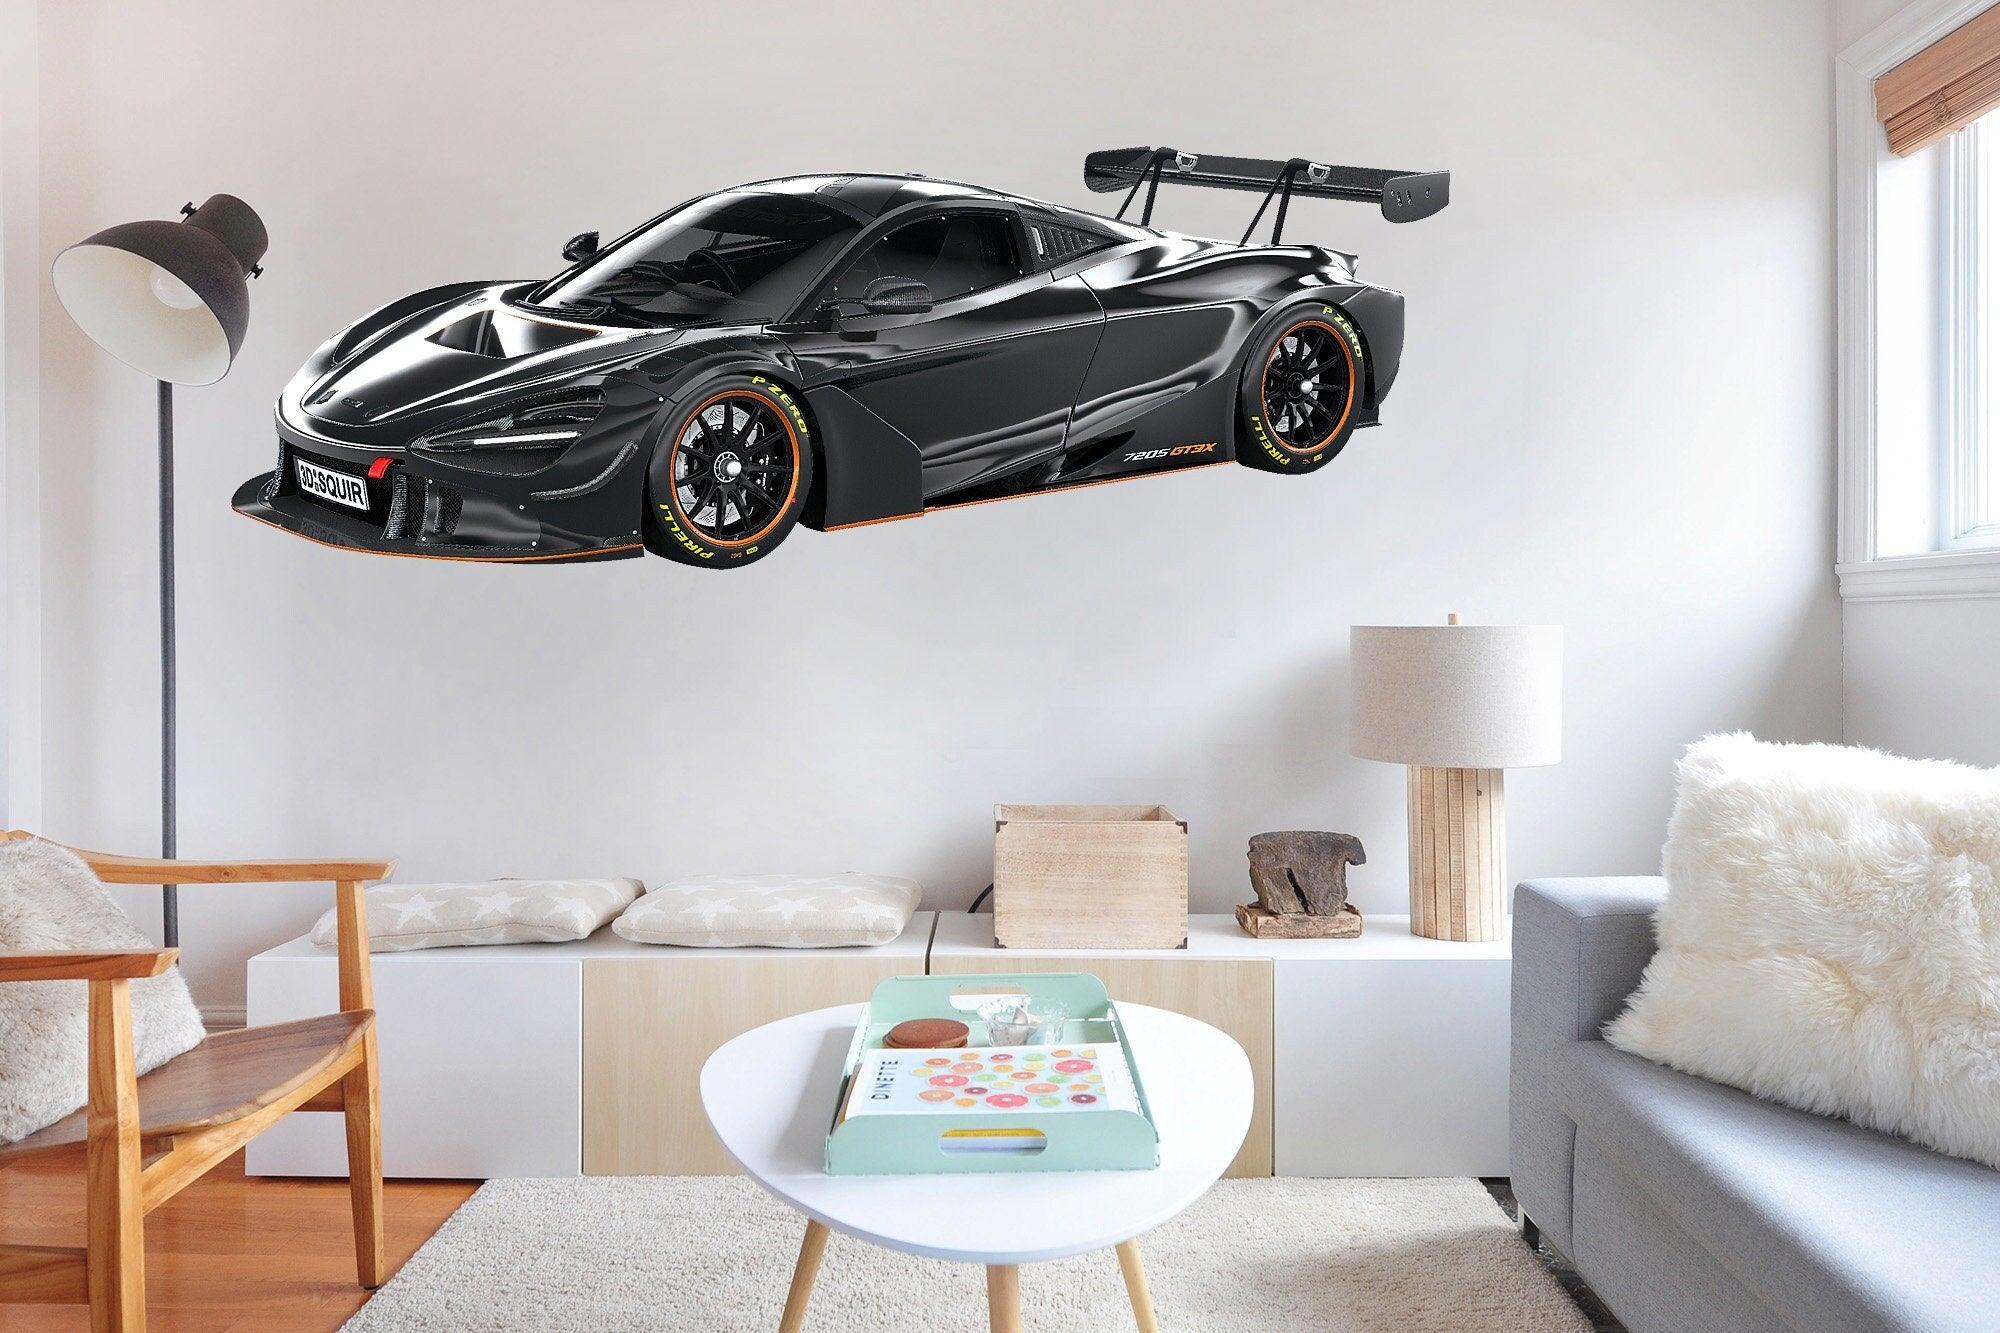 man cave wall decals